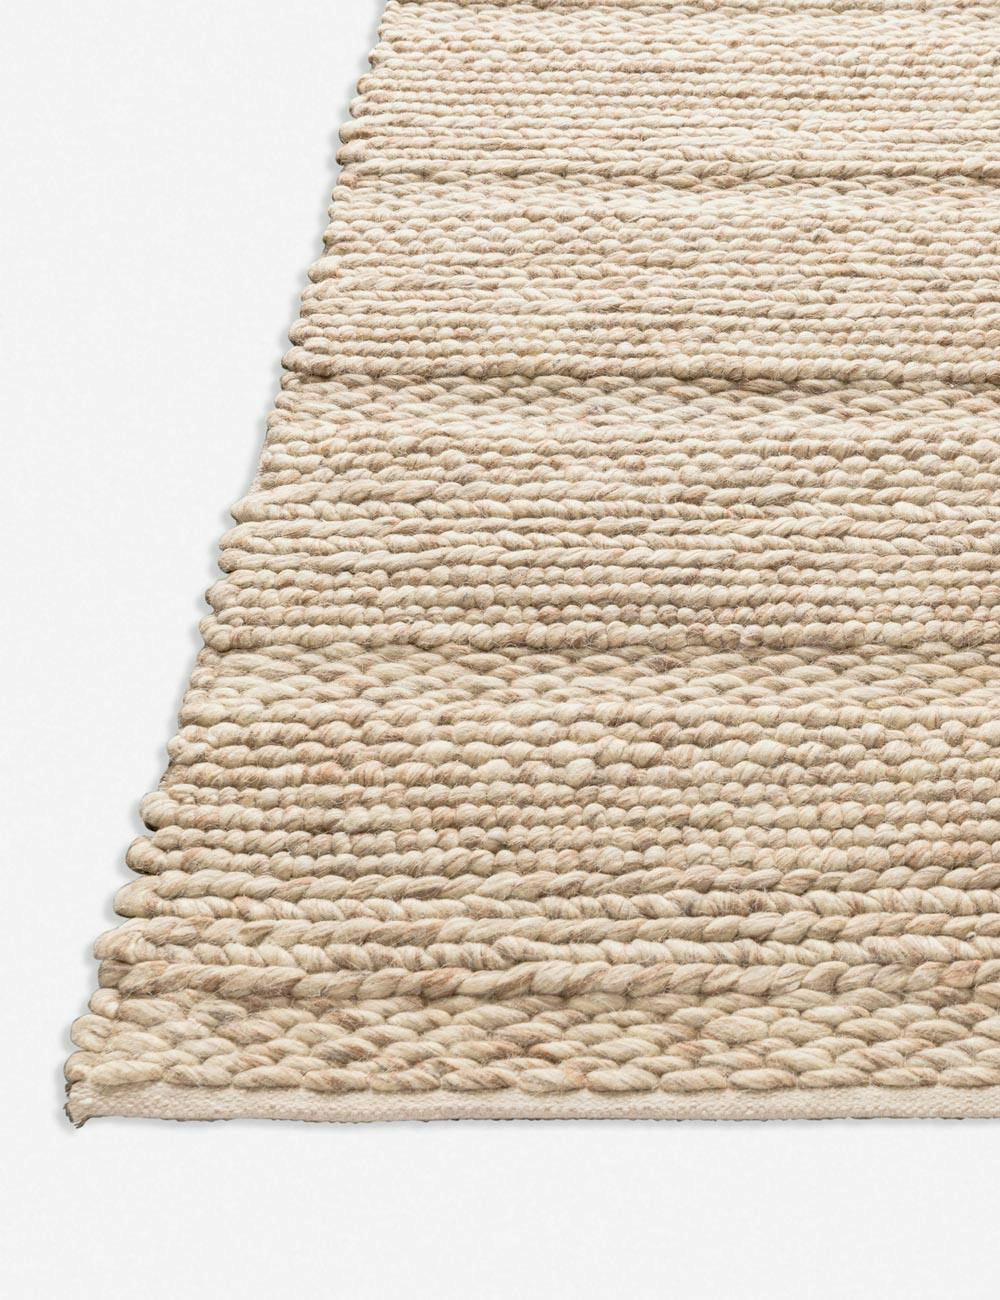 Colter Rug - 2' x 3'